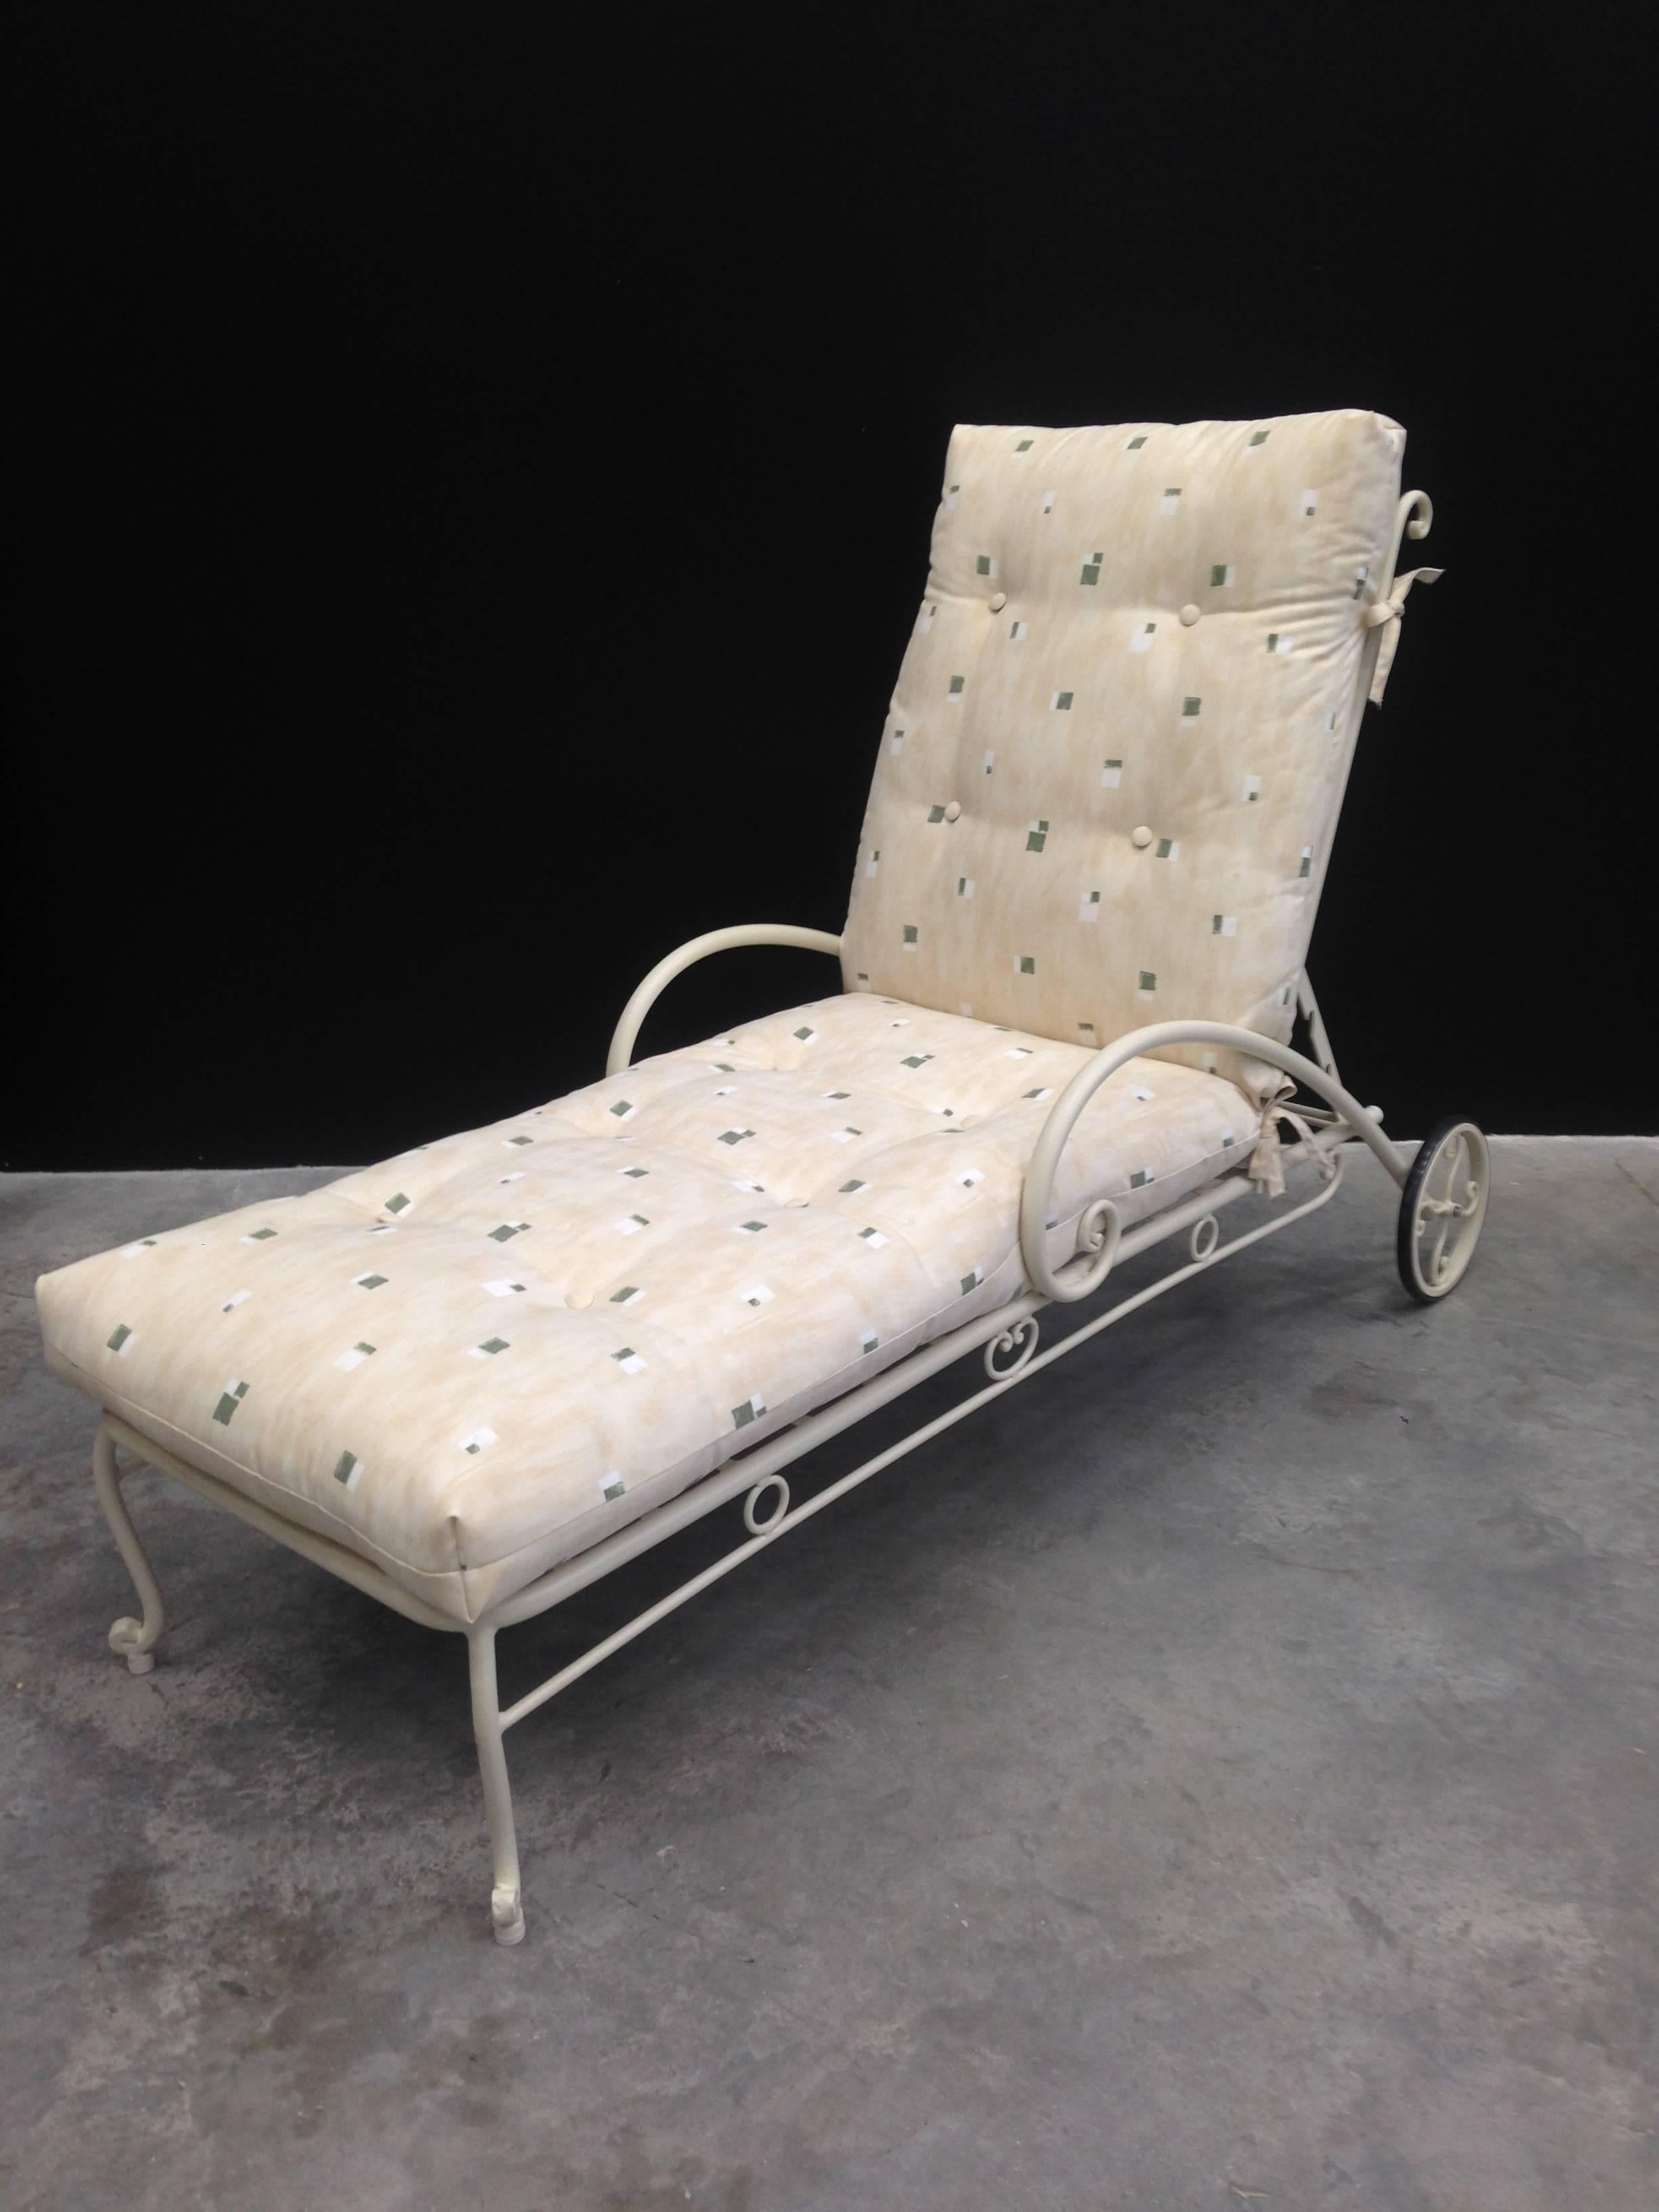 Vintage French Style Wrought Iron Chaise Longue with Cushion For Sale 3